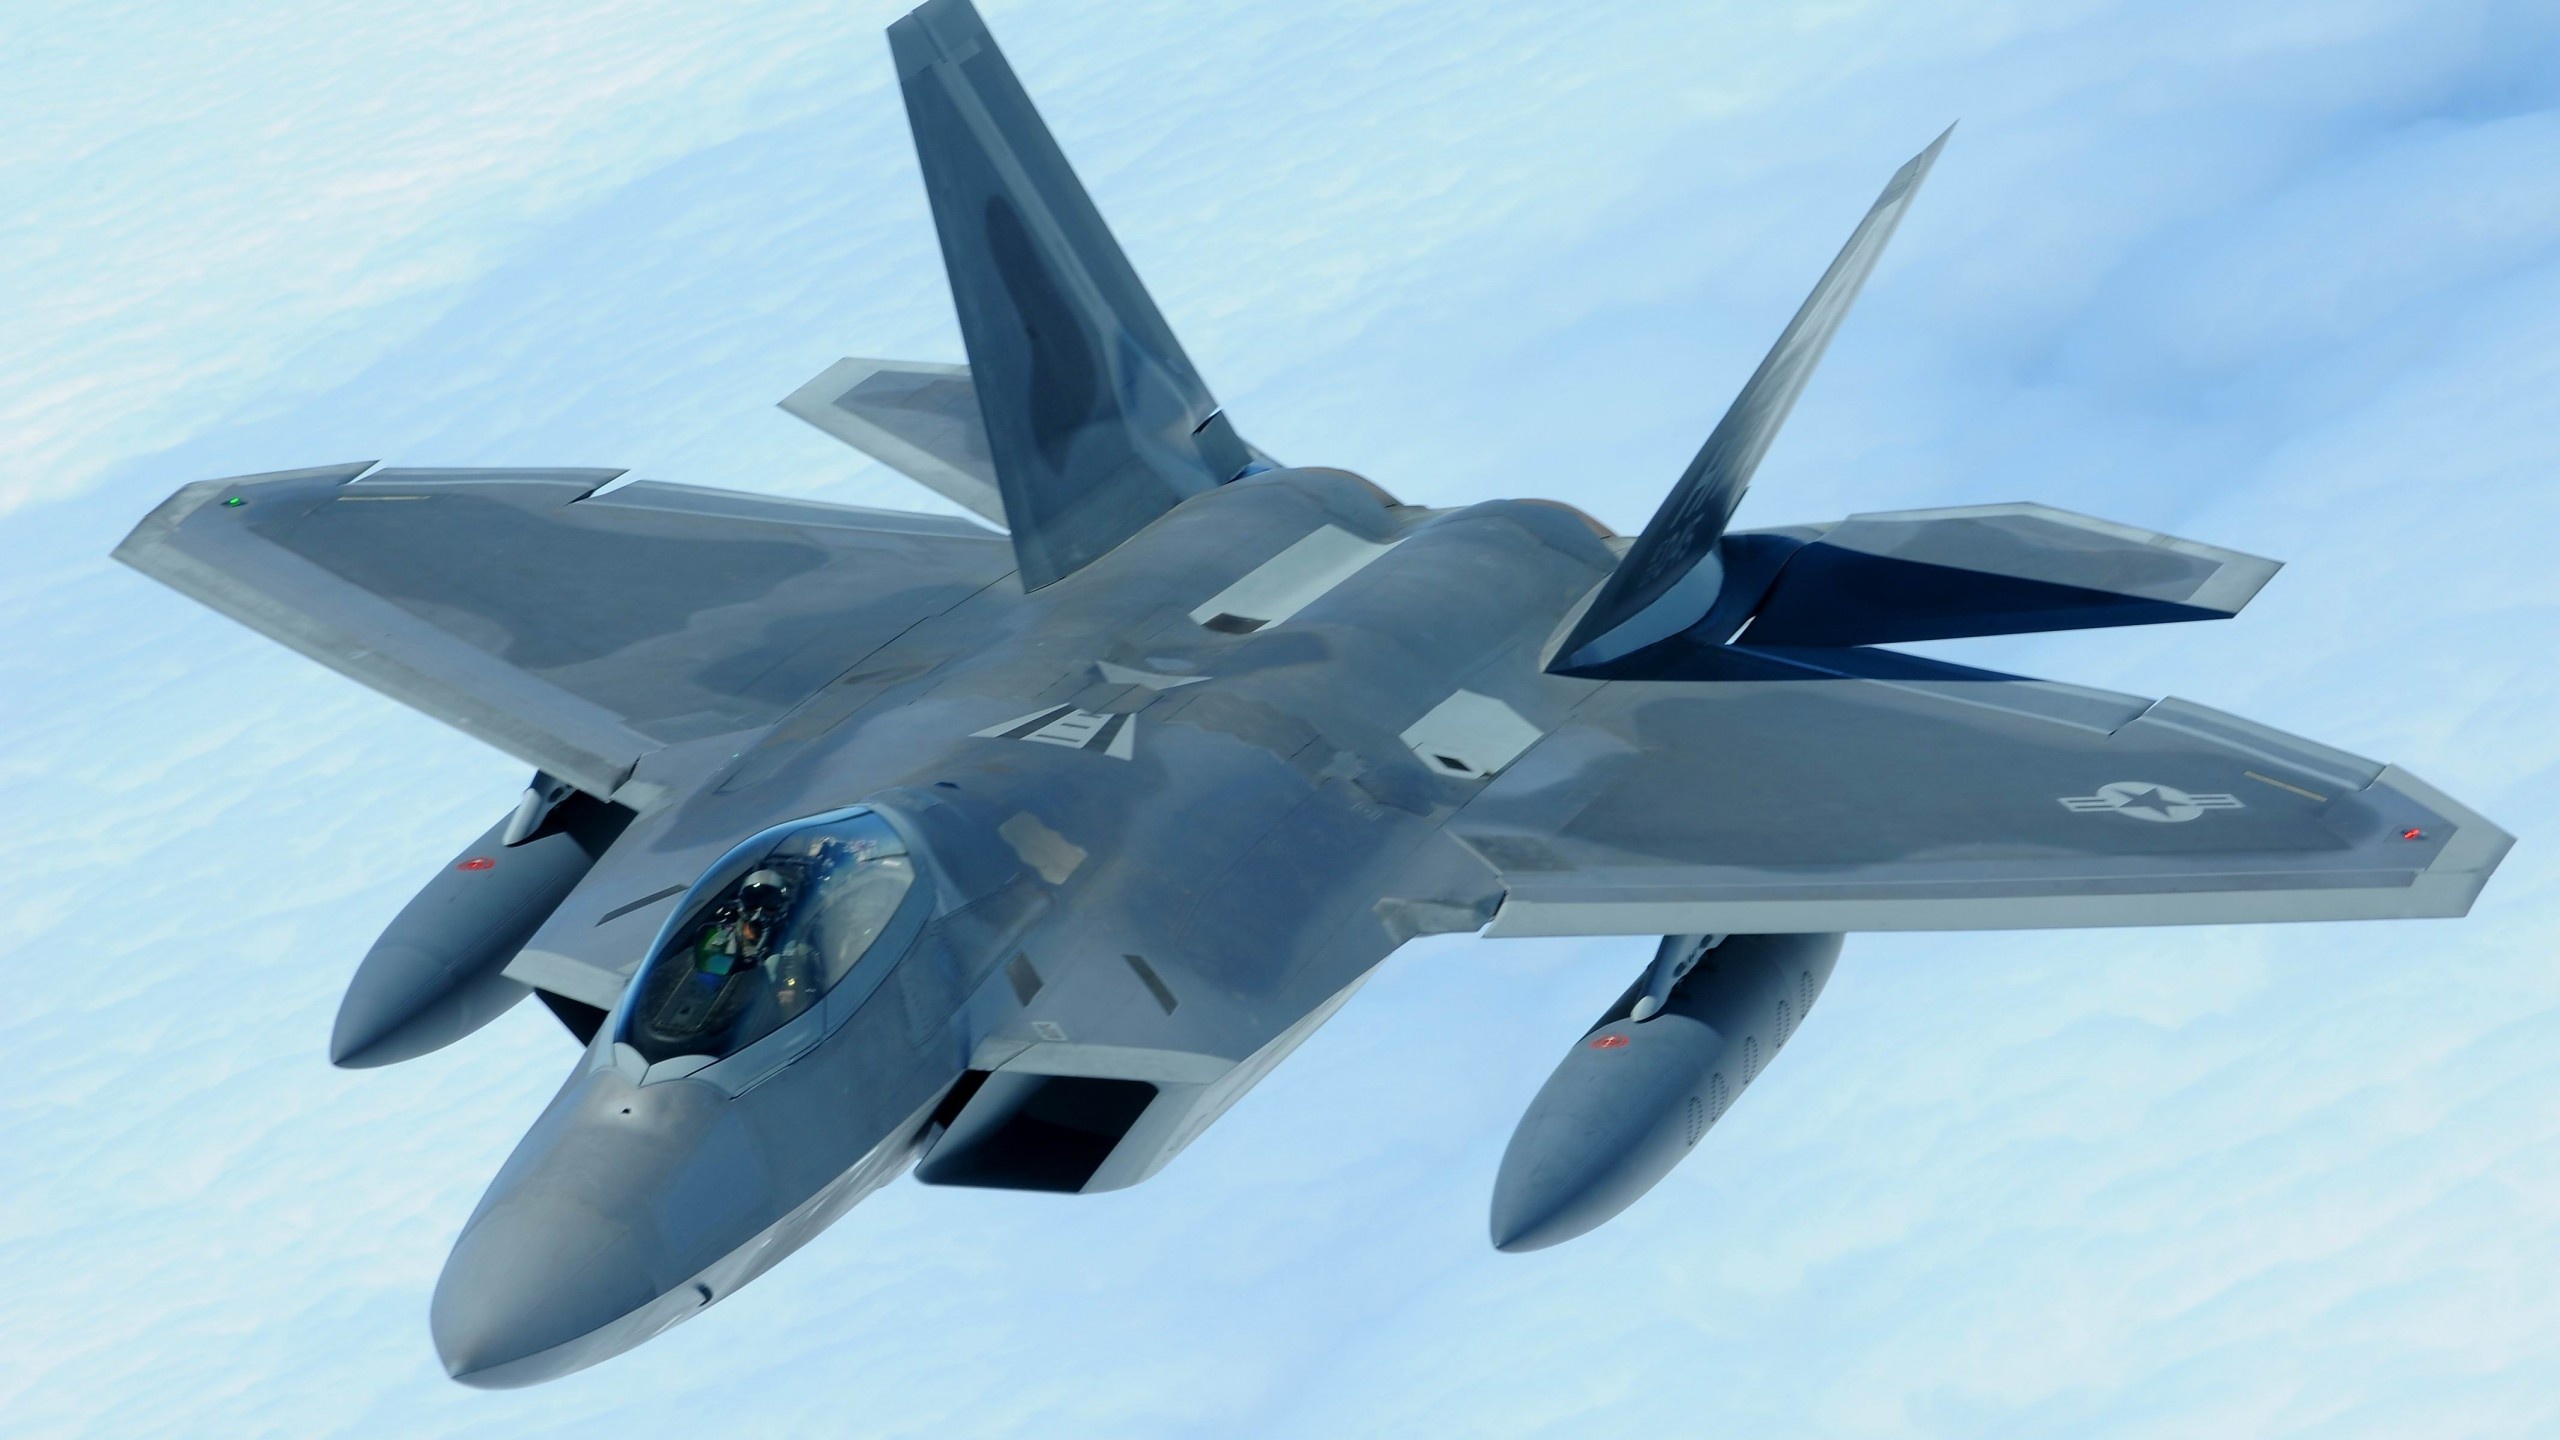 General 2560x1440 airplane aircraft F-22 Raptor US Air Force stealth military aircraft military vehicle military vehicle flying jet fighter Lockheed Martin American aircraft cyan